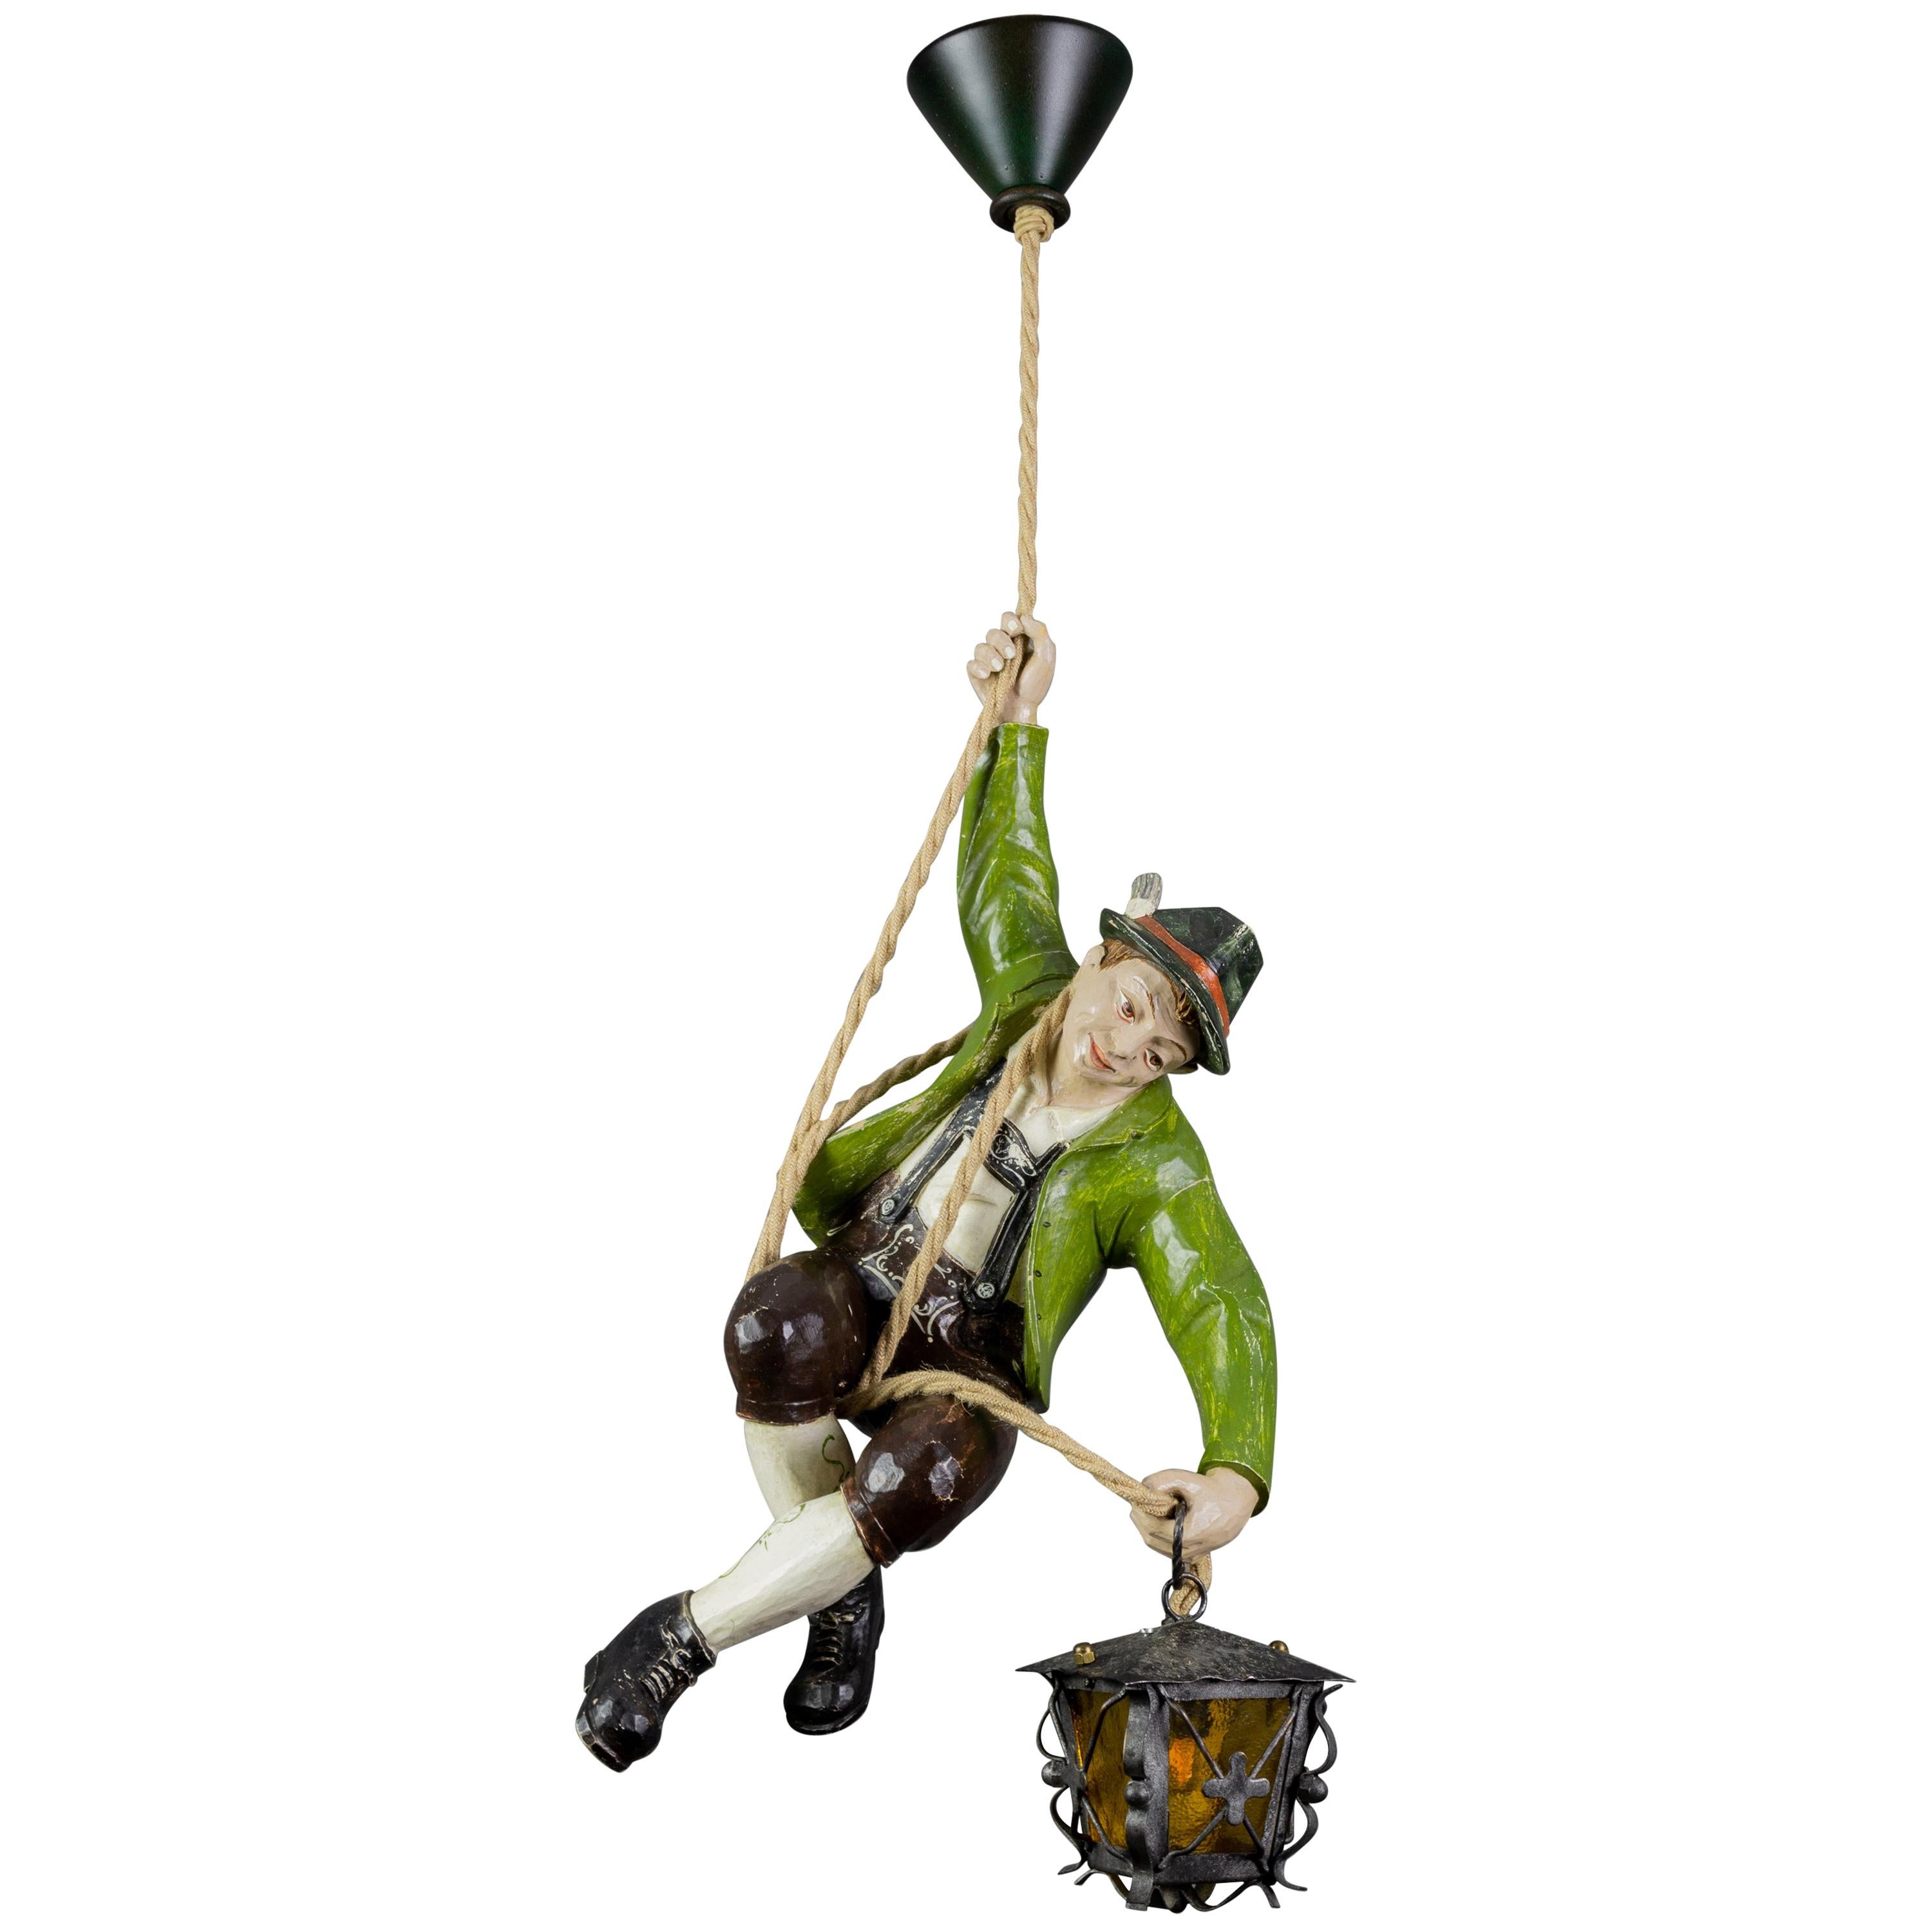 German Pendant Light with Carved Wooden Mountain Climber Figure and Lantern